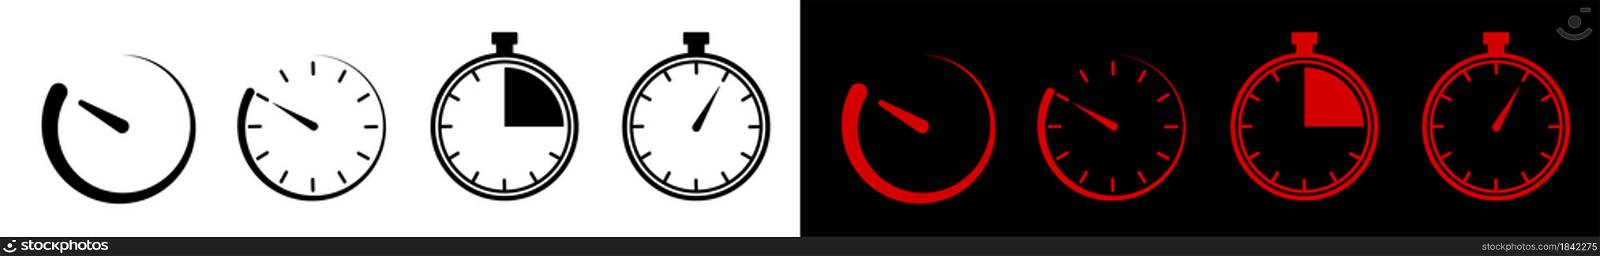 mechanical stopwatch dial with hands. Set of stylized icons. Countdown, speed measurement. Black and white vector